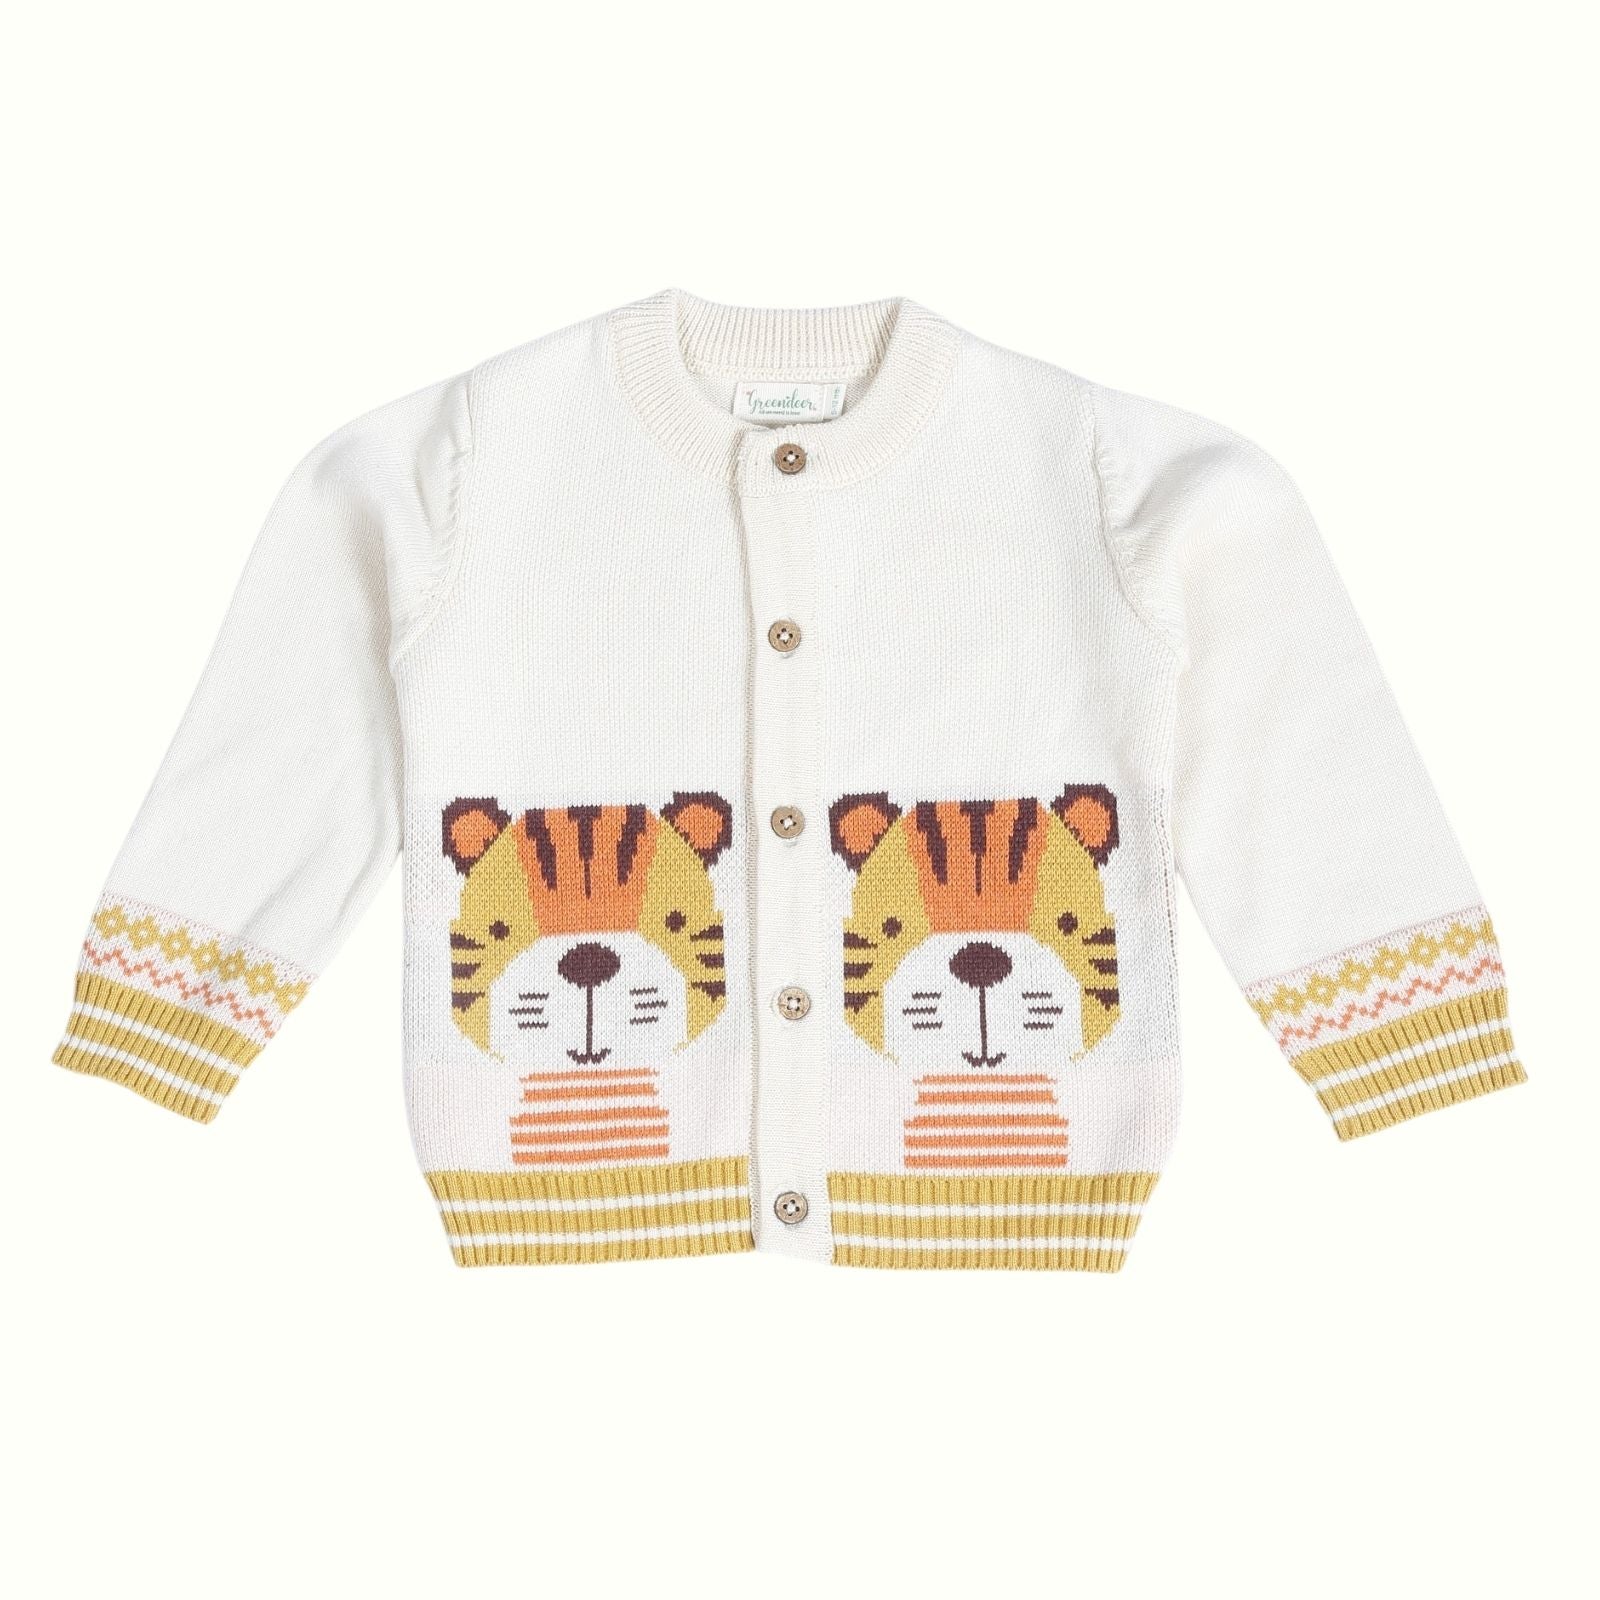 Greendeer Delighted Lion & Adorable Tiger 100% Cotton Sweater with Lower Set of 3